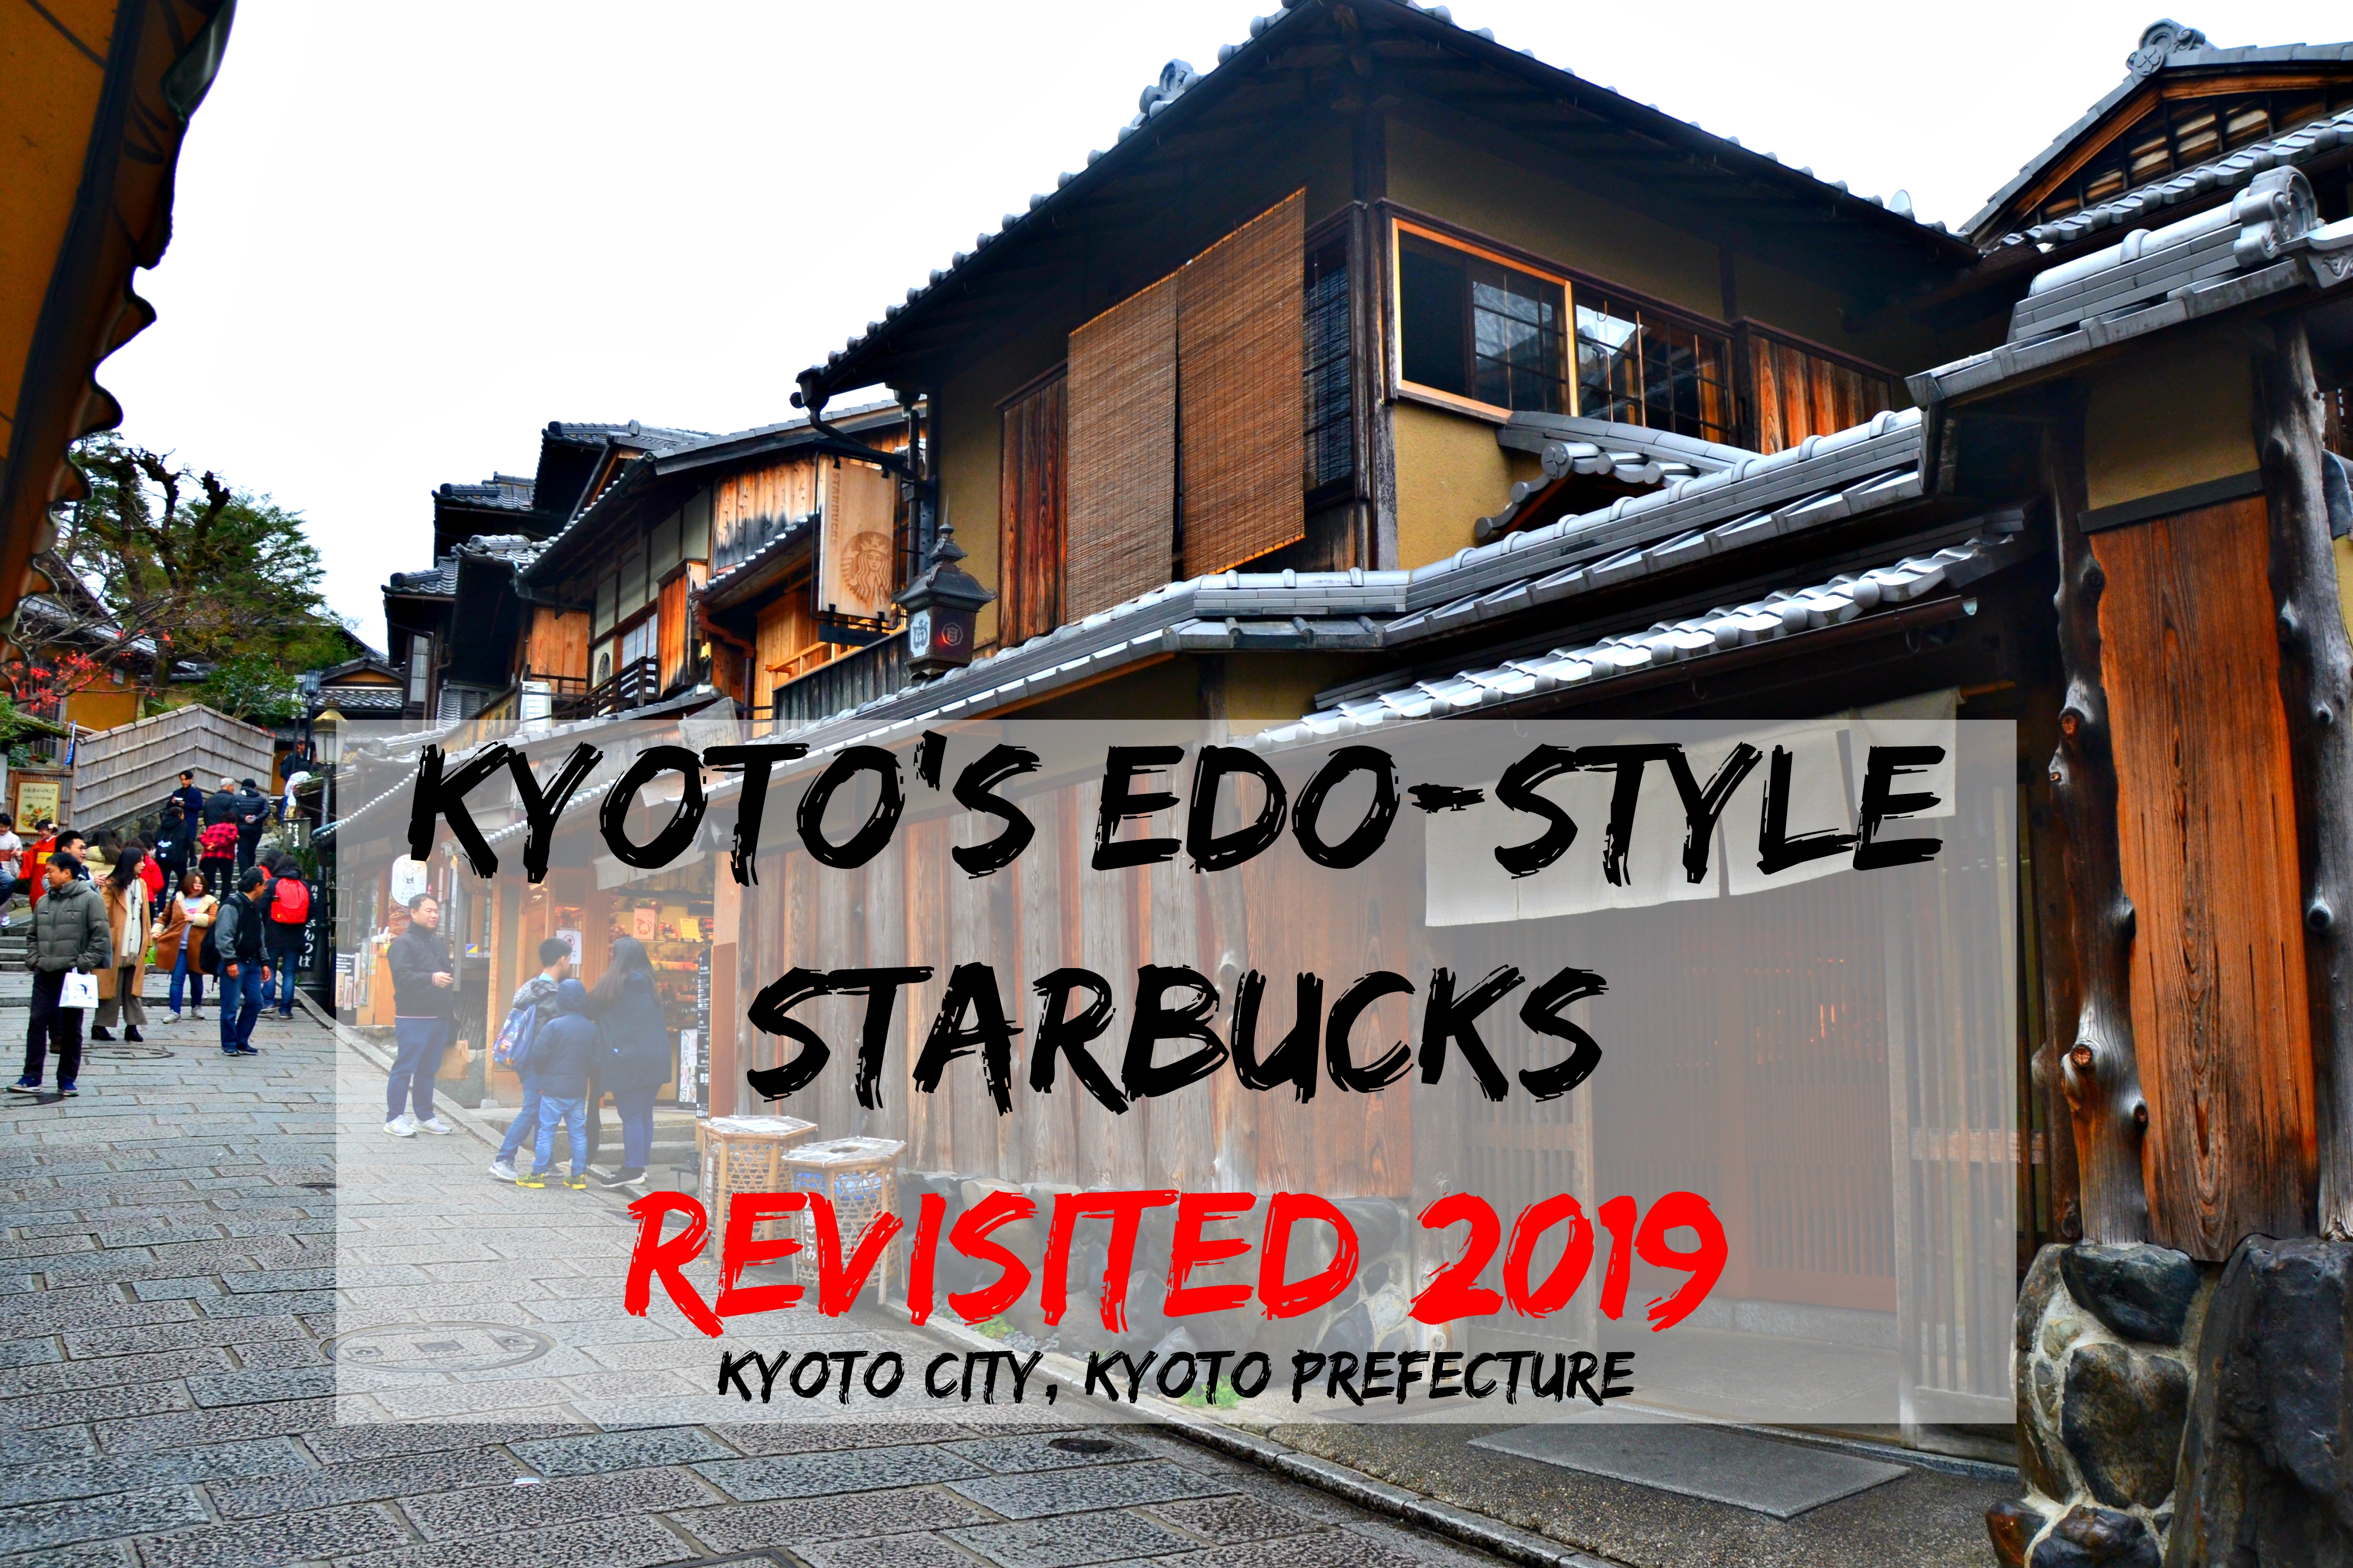 Looking for a place to experience old Japan while sipping your favorite coffee? Then join me as we check out the Edo-style Starbucks in Kyoto.